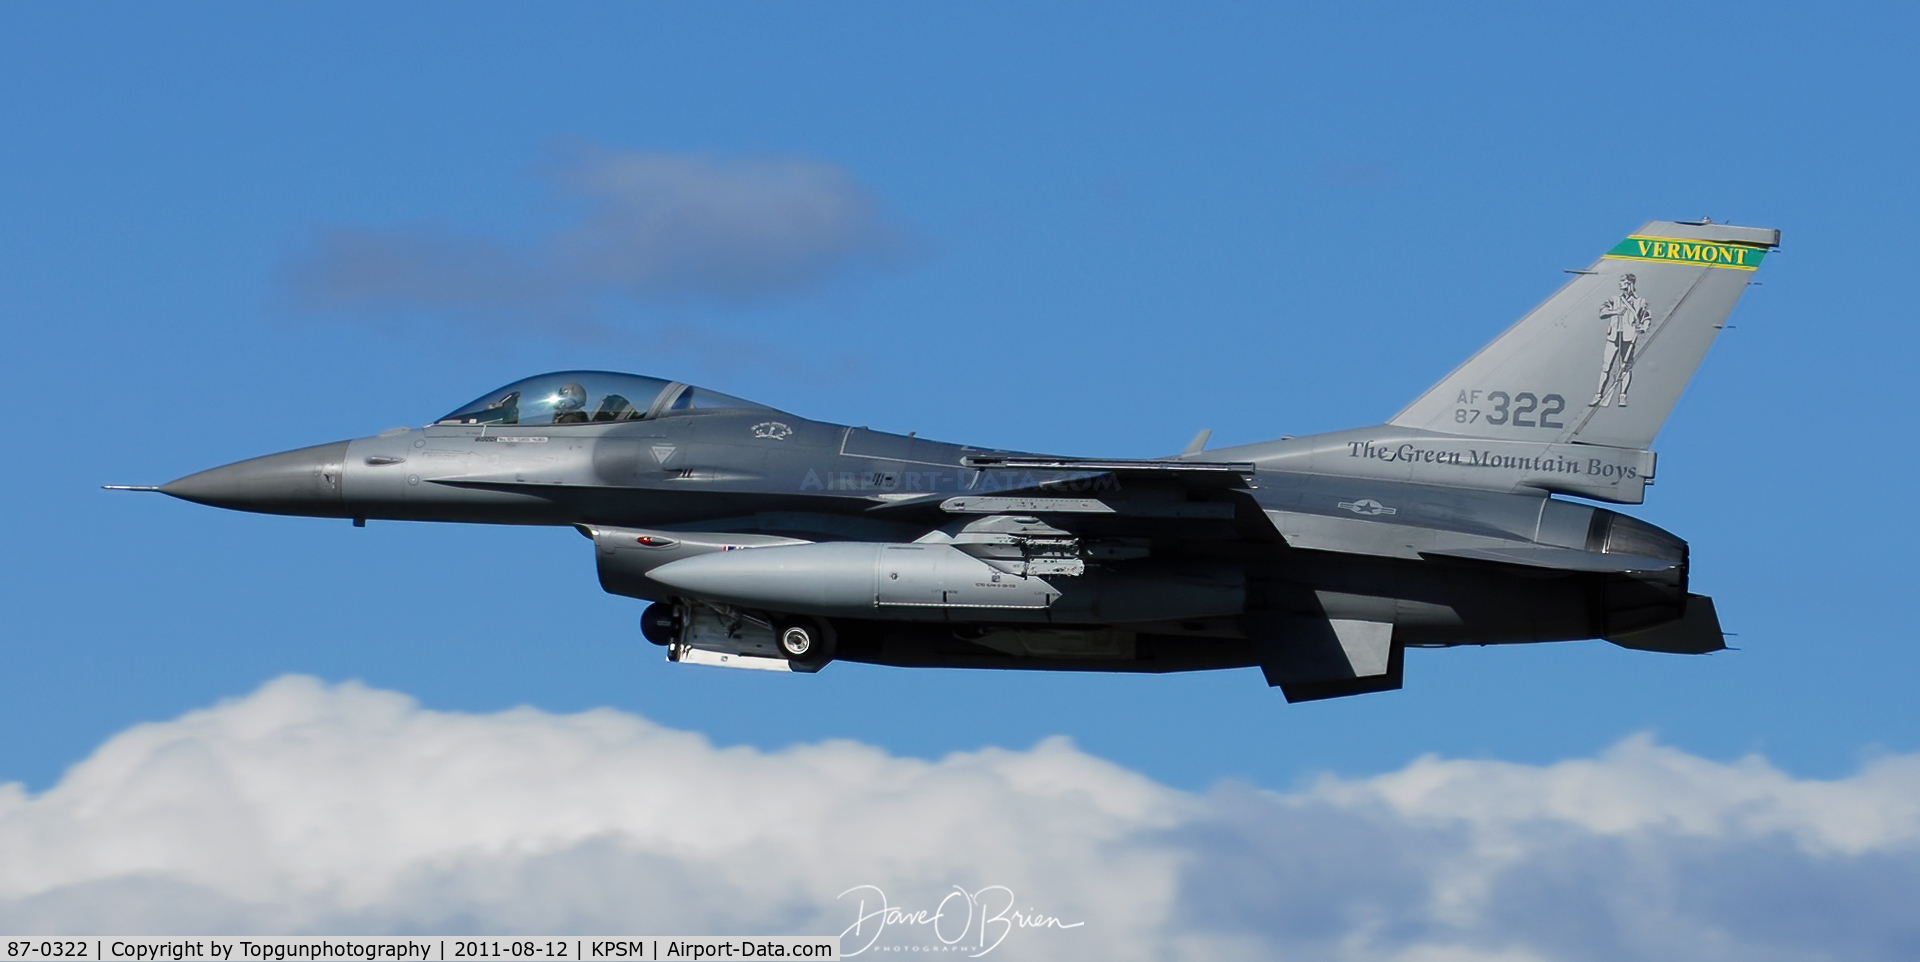 87-0322, 1987 General Dynamics F-16C Fighting Falcon C/N 5C-583, MAPLE11 arriving for static display makes a low approach